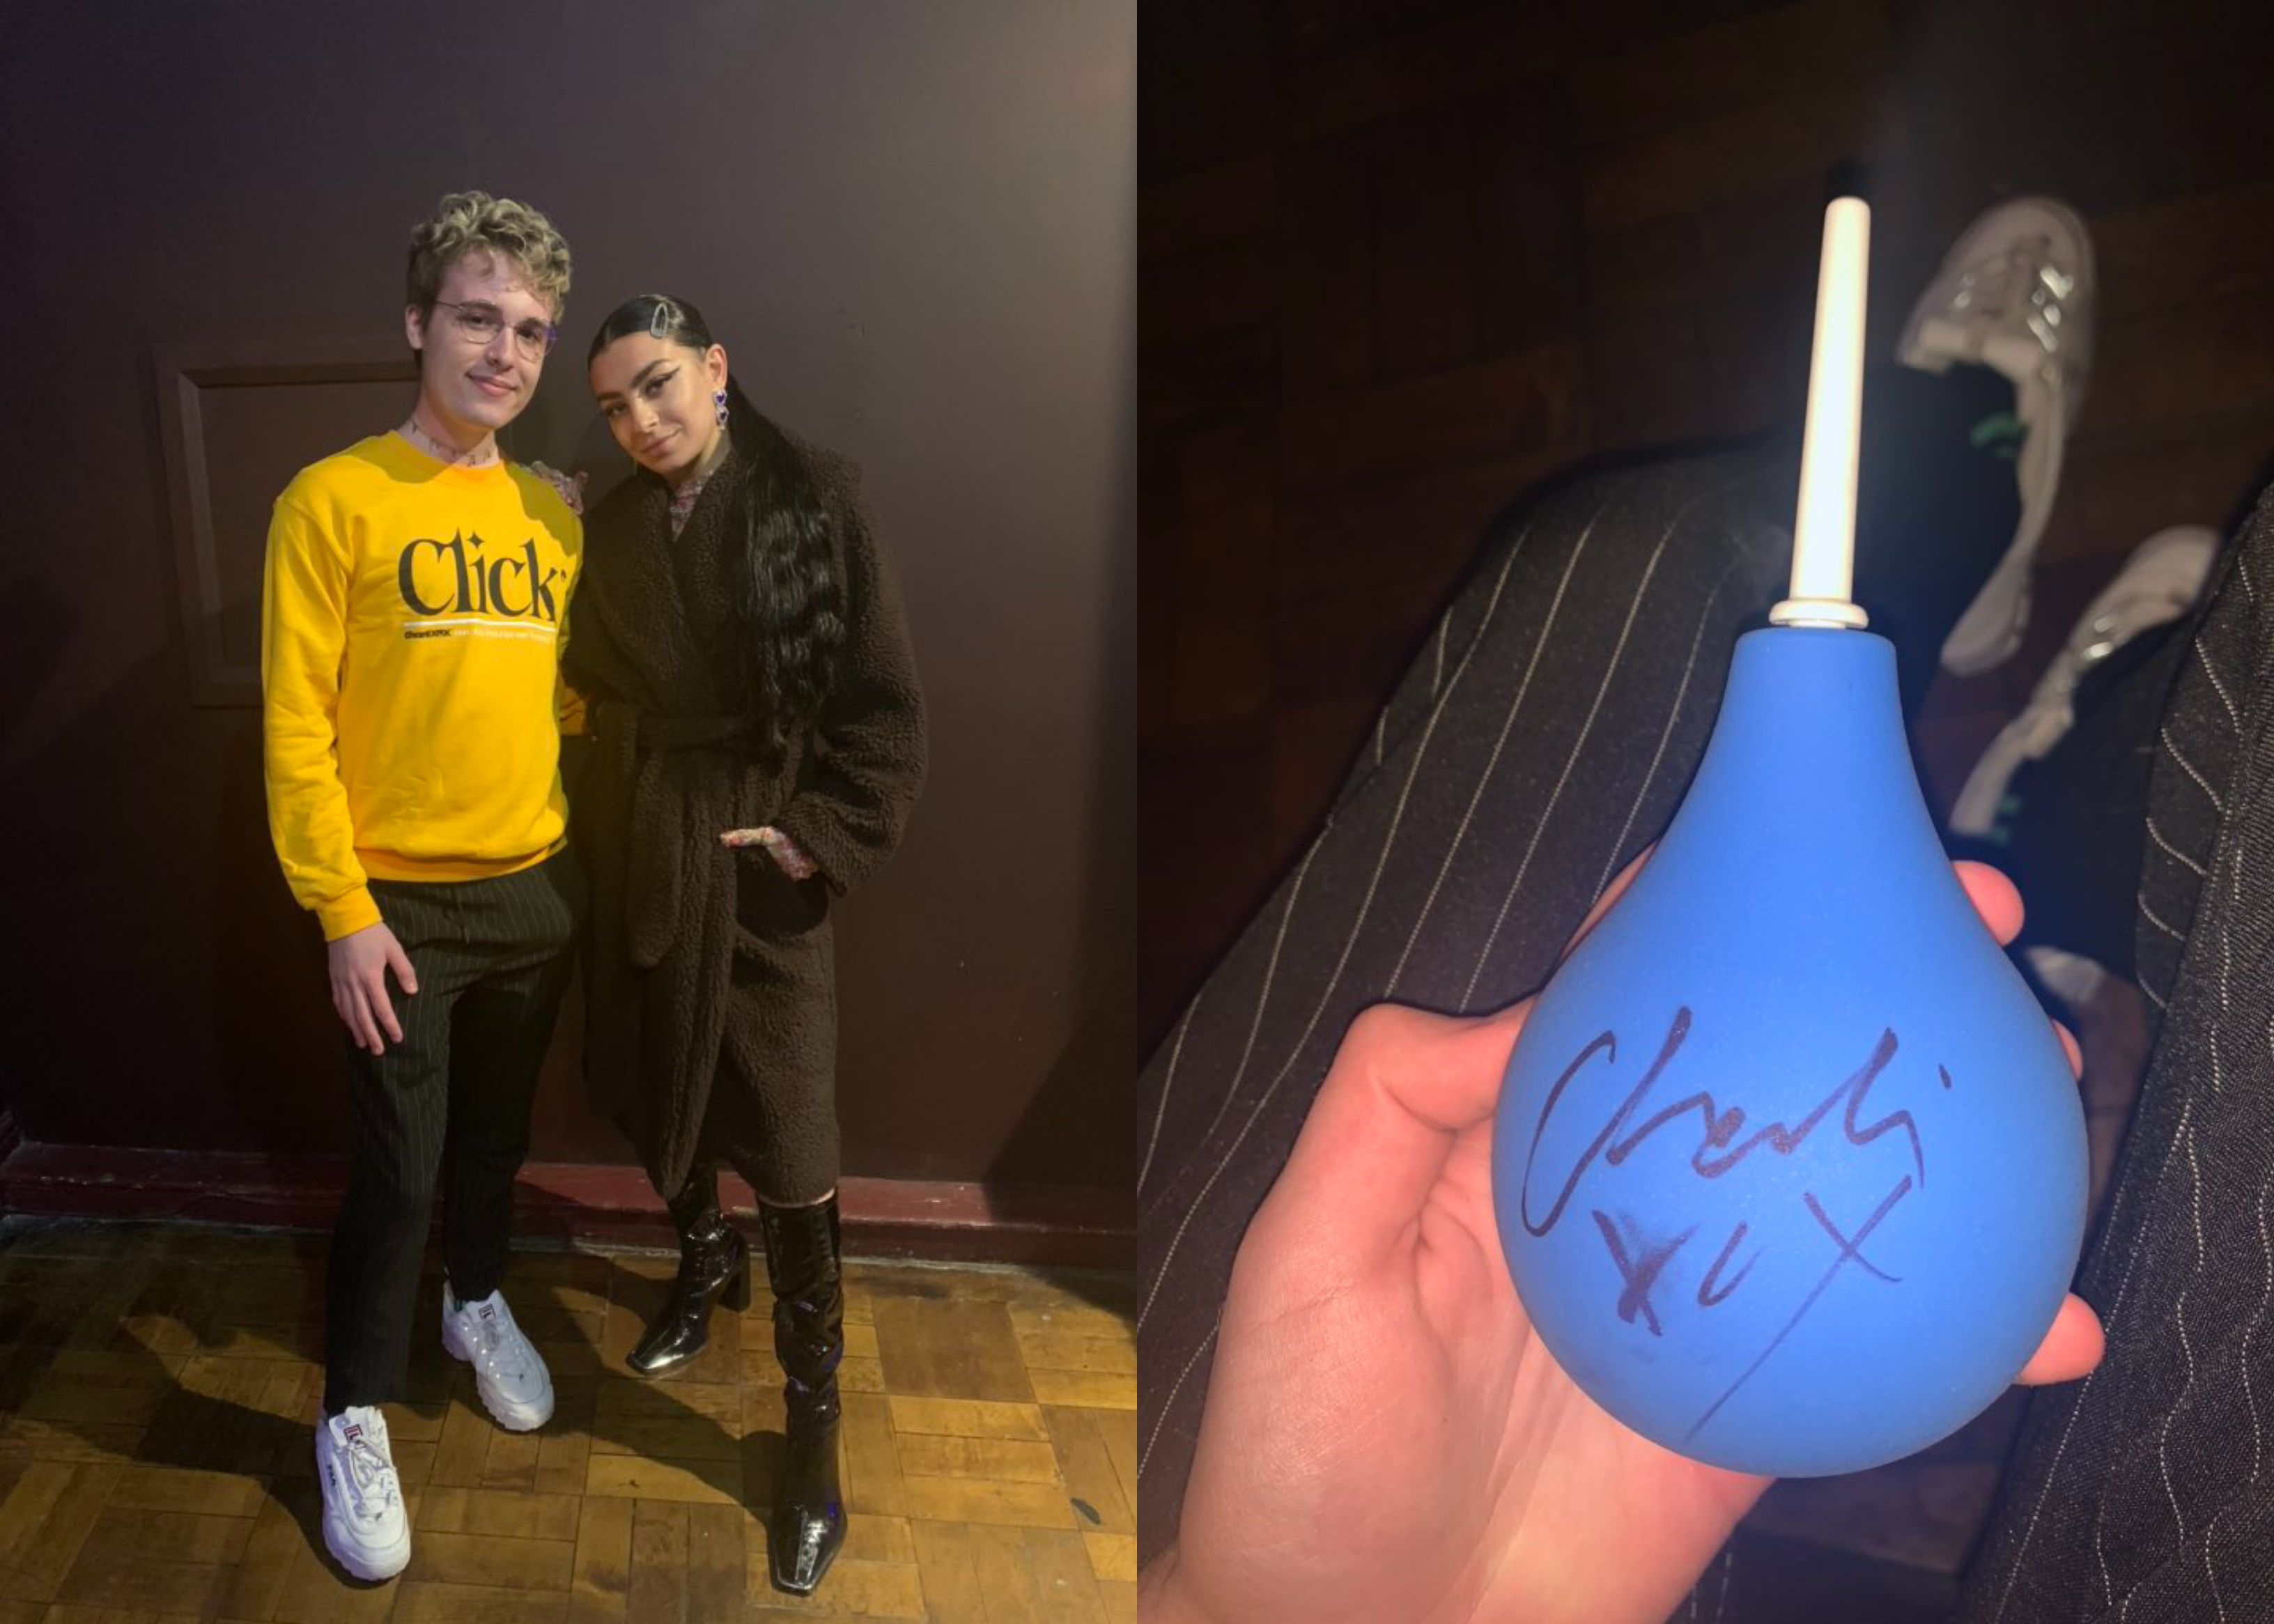 Charli XCX signed a fan's douche and gay Twitter has a lot of thoughts